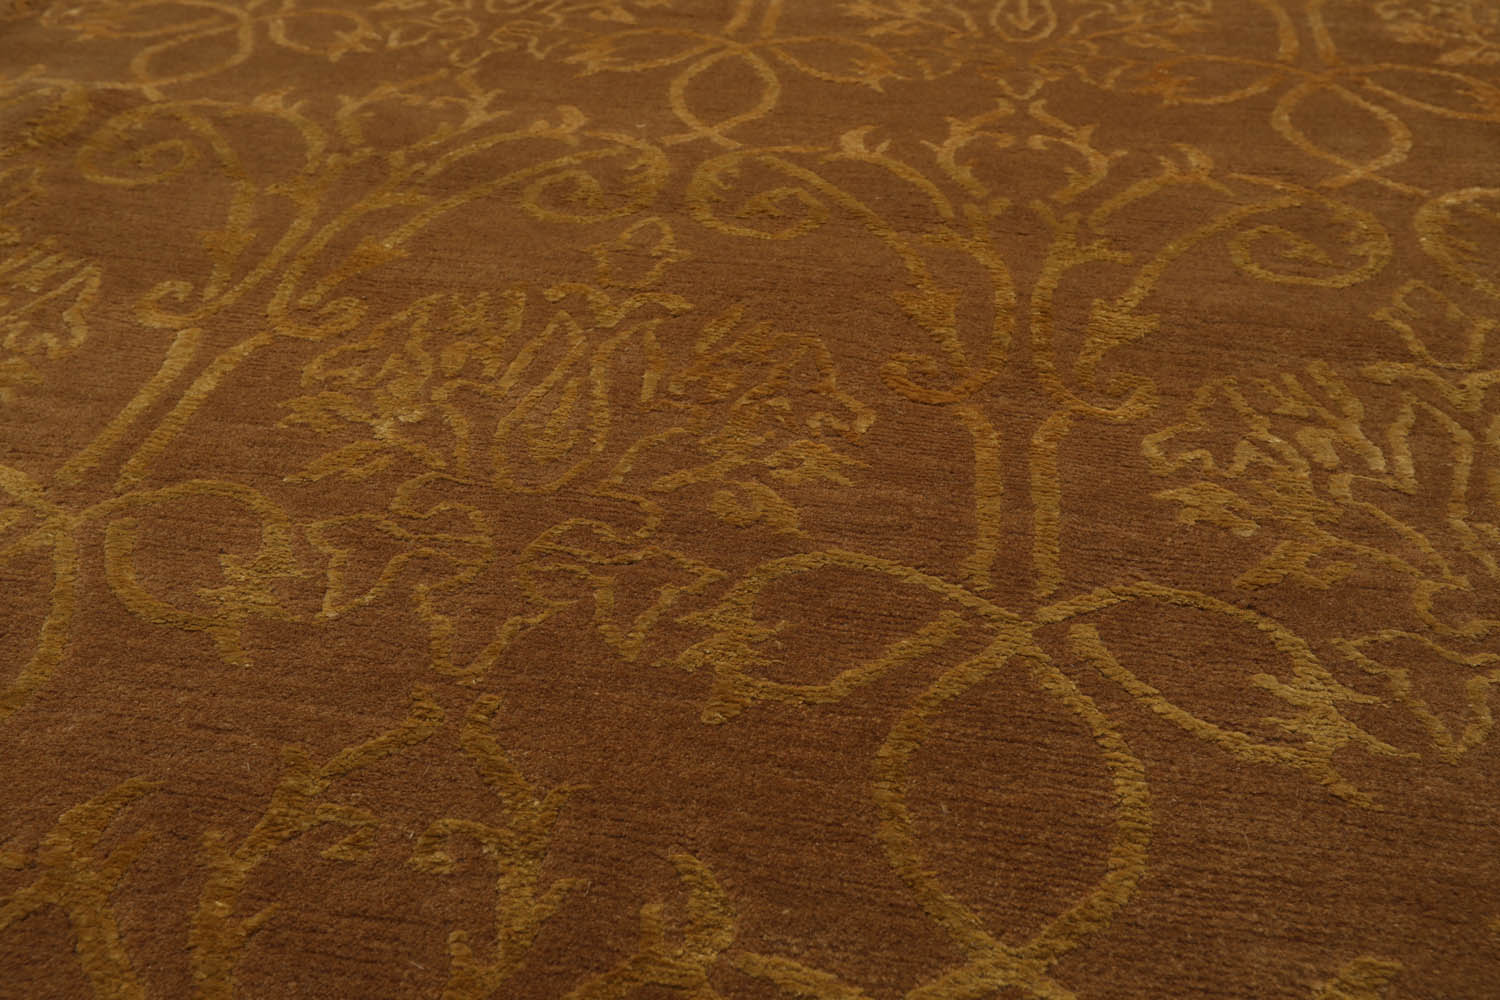 Gaibrial 6x9 Hand Knotted Tibetan Wool and Silk Transitional Oriental Area Rug Tone on Tone Gold Color